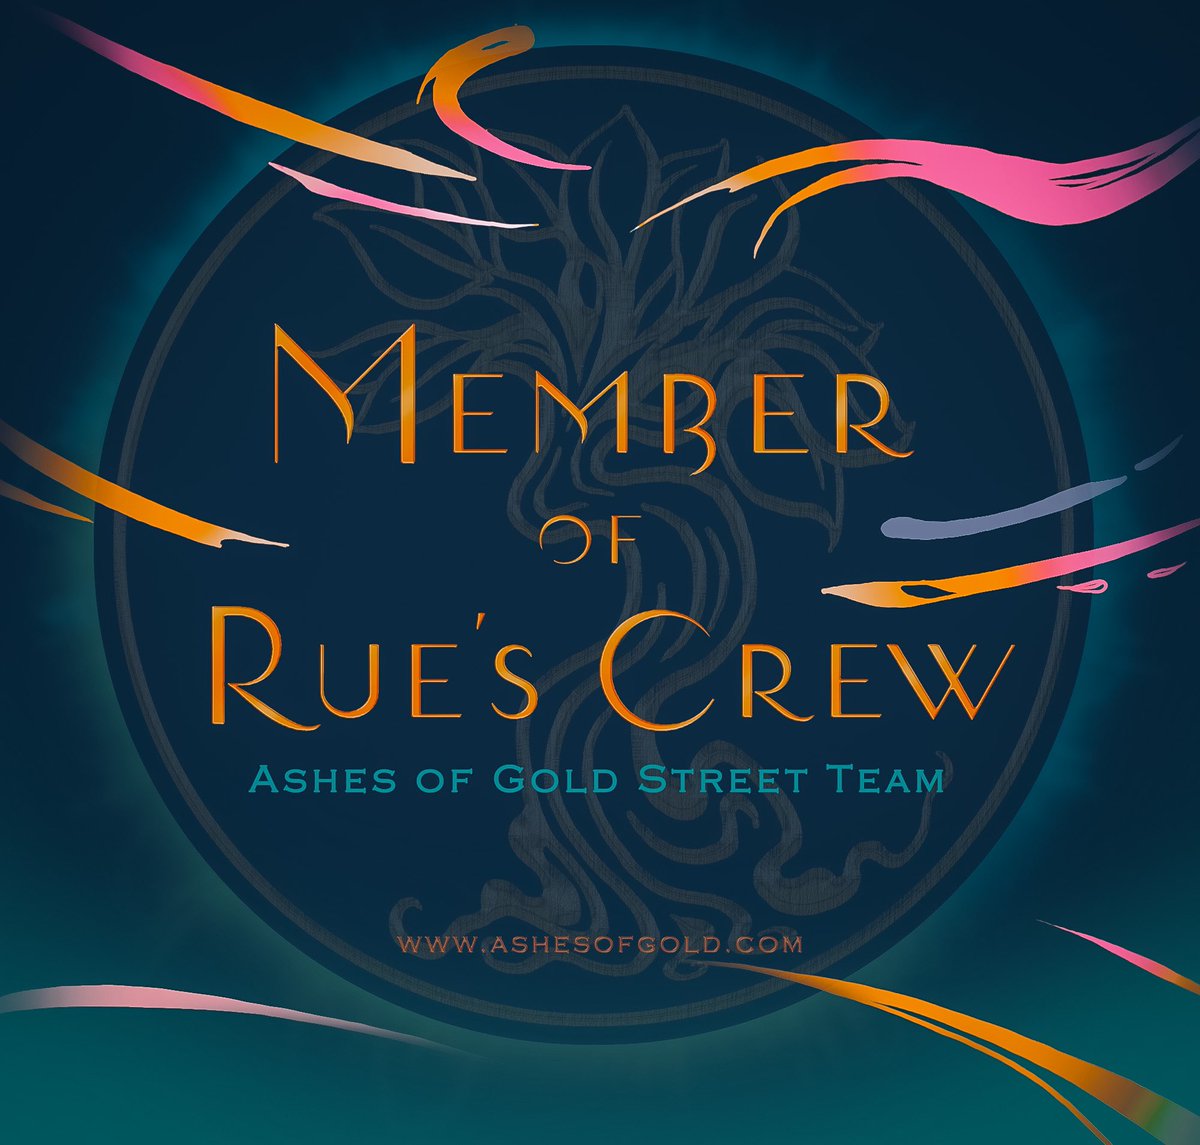 OMG IM SCREAMING….SO happy to be a Street Team member of Rue’s Crew for my fav author @AuthorJElle 🎉

Loved Wings of Ebony and I’m SOO excited for the sequel!!!!! 

Also, have y’all seen the WOE website? I’m obsessed wingsofebony.com

#ashesofgold #writerslife